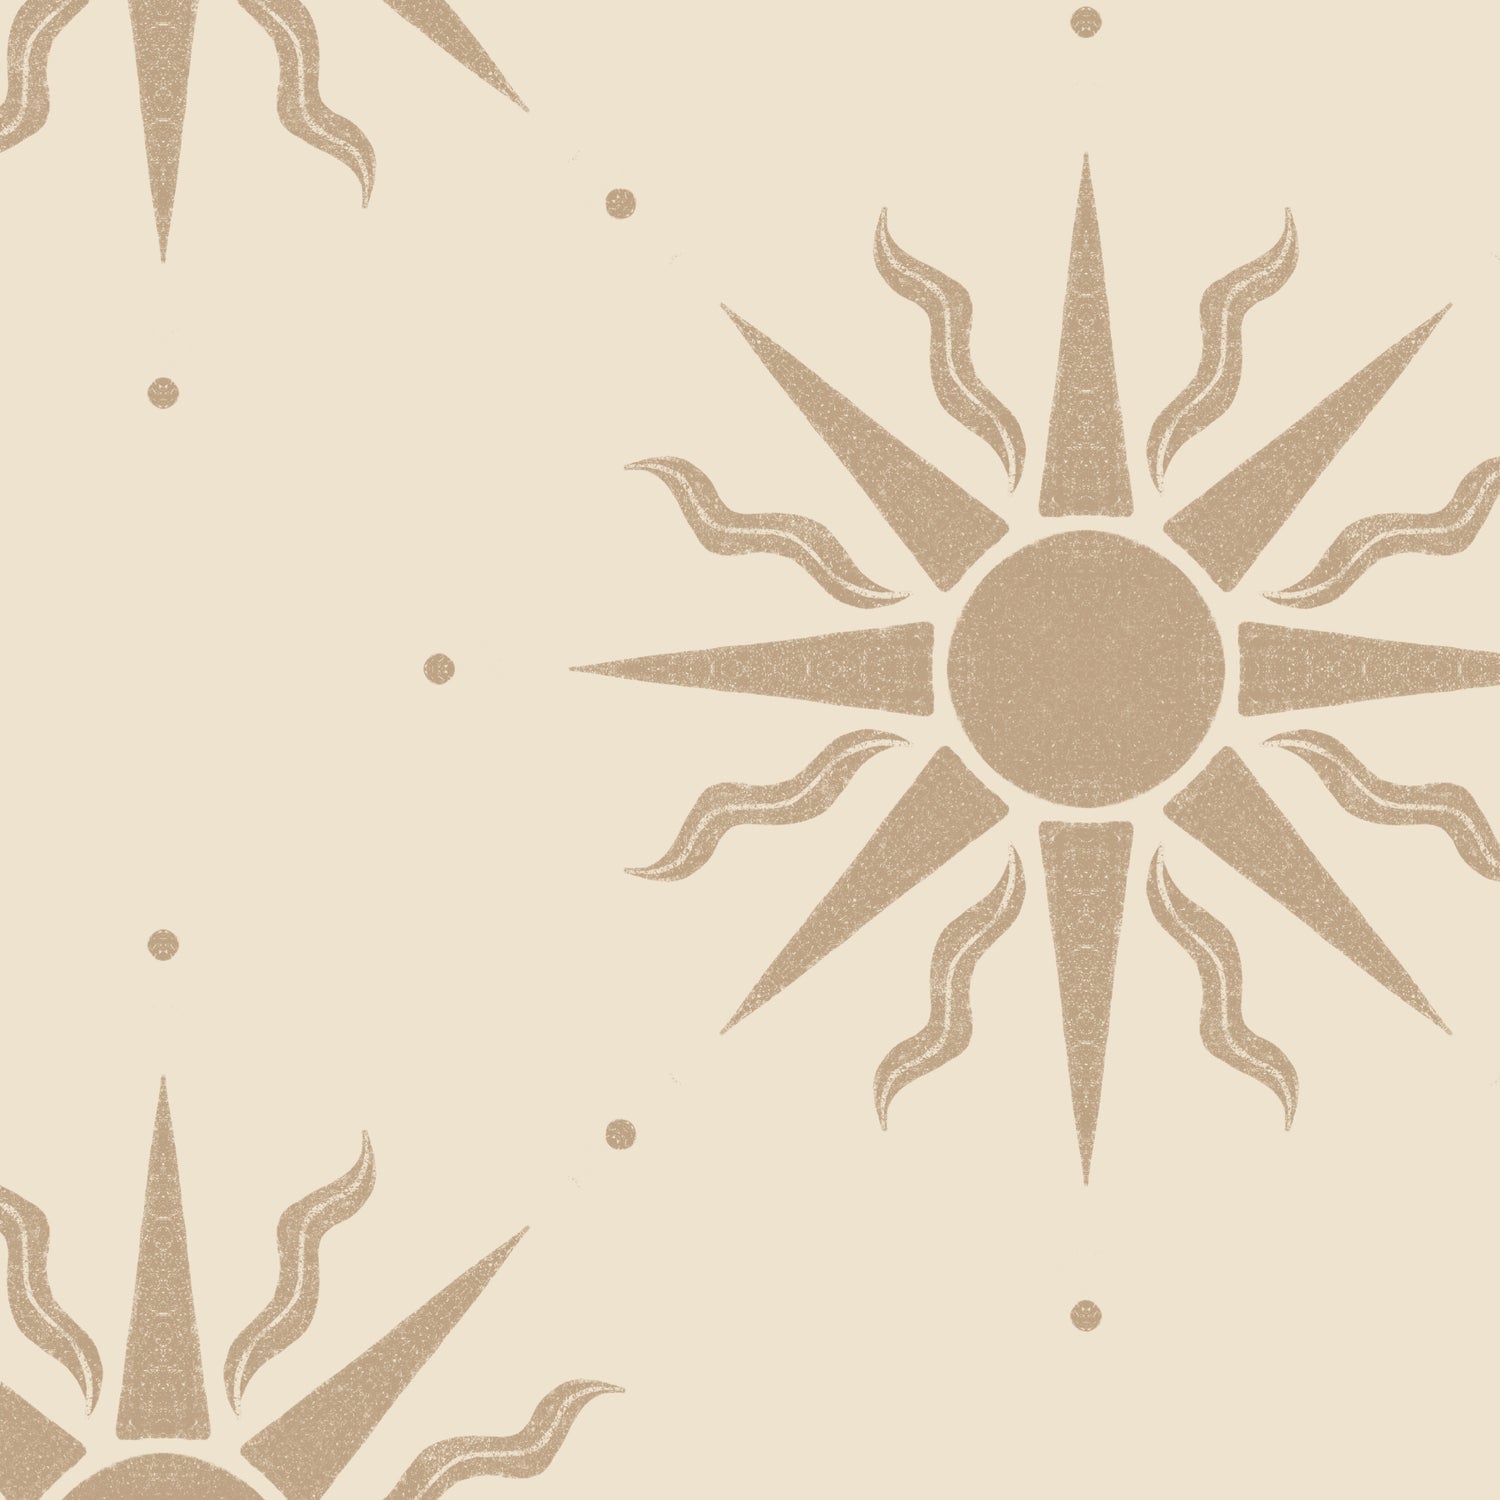 Sunny Suns Wallpaper in Tan shown in a close up view.